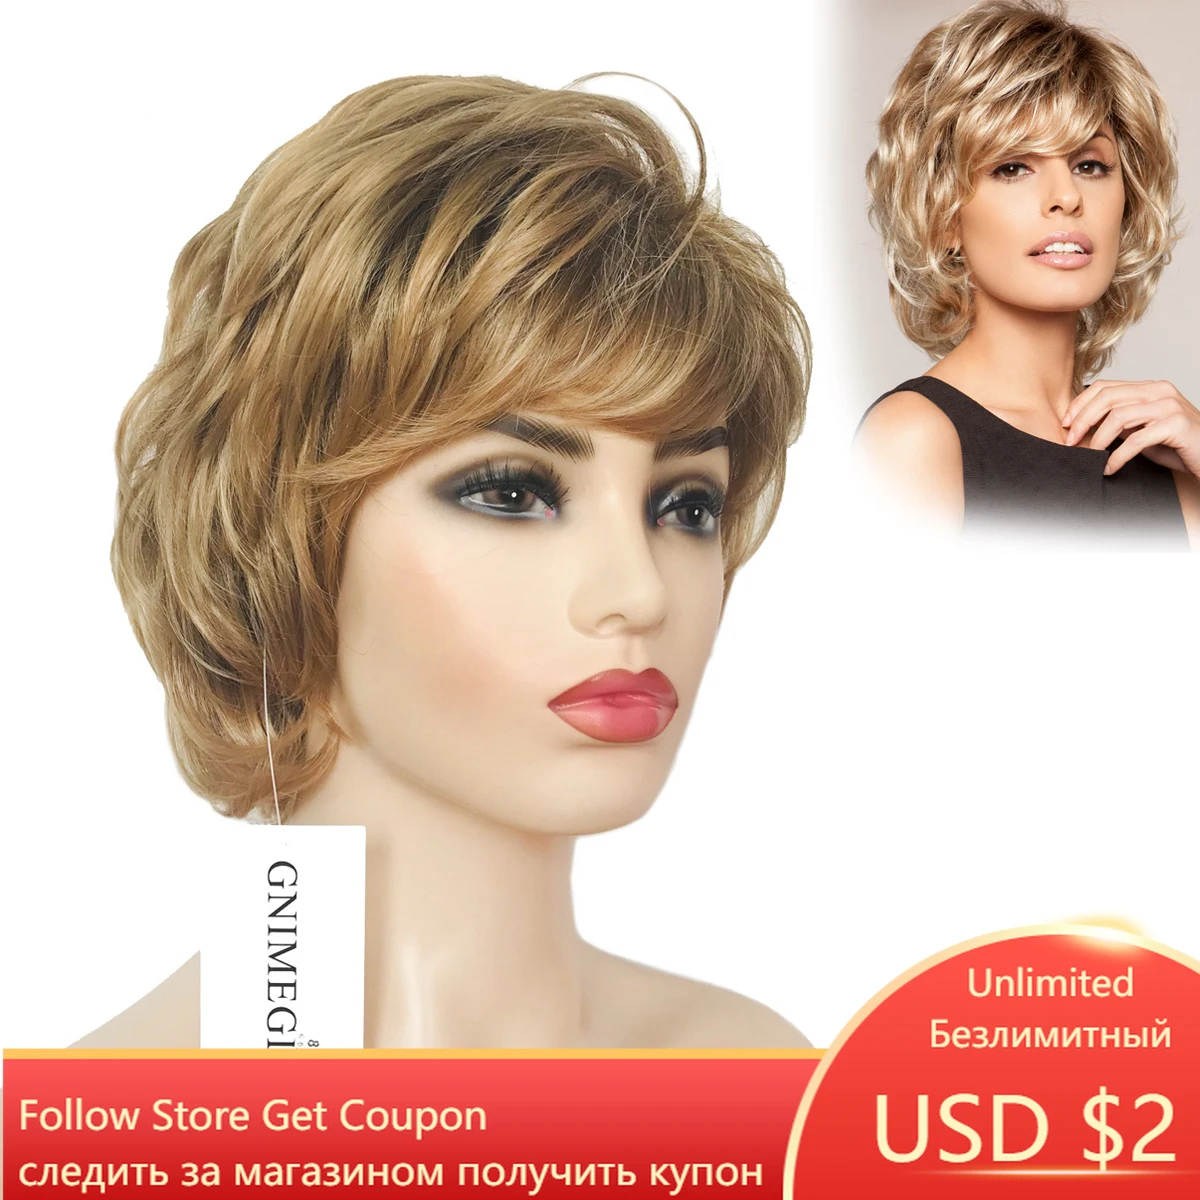 

GNIMEGIL Female Blonde Wigs for Women Synthetic Hair with Bangs Soft Wave Short Hairstyles Bob Haircut Natural Wig for Ladies